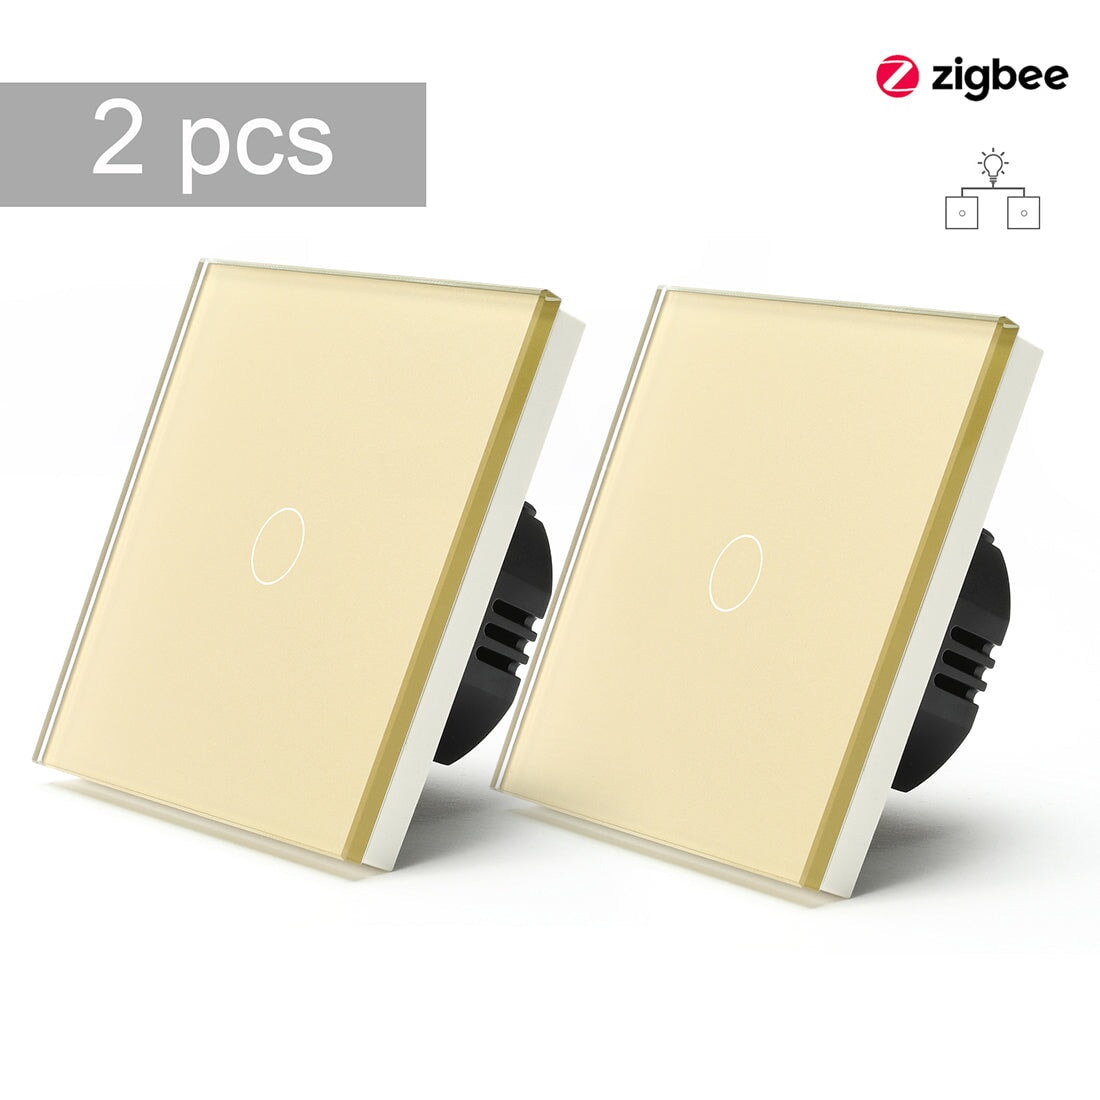 BSEED Zigbee Single Live Line Switch 1/2/3 Gang 1/2/3 Way Wall Smart Light Switch Single Live Line 1/2/3 pack Light Switches Bseedswitch Golden 1Gang 2 Pcs/Pack